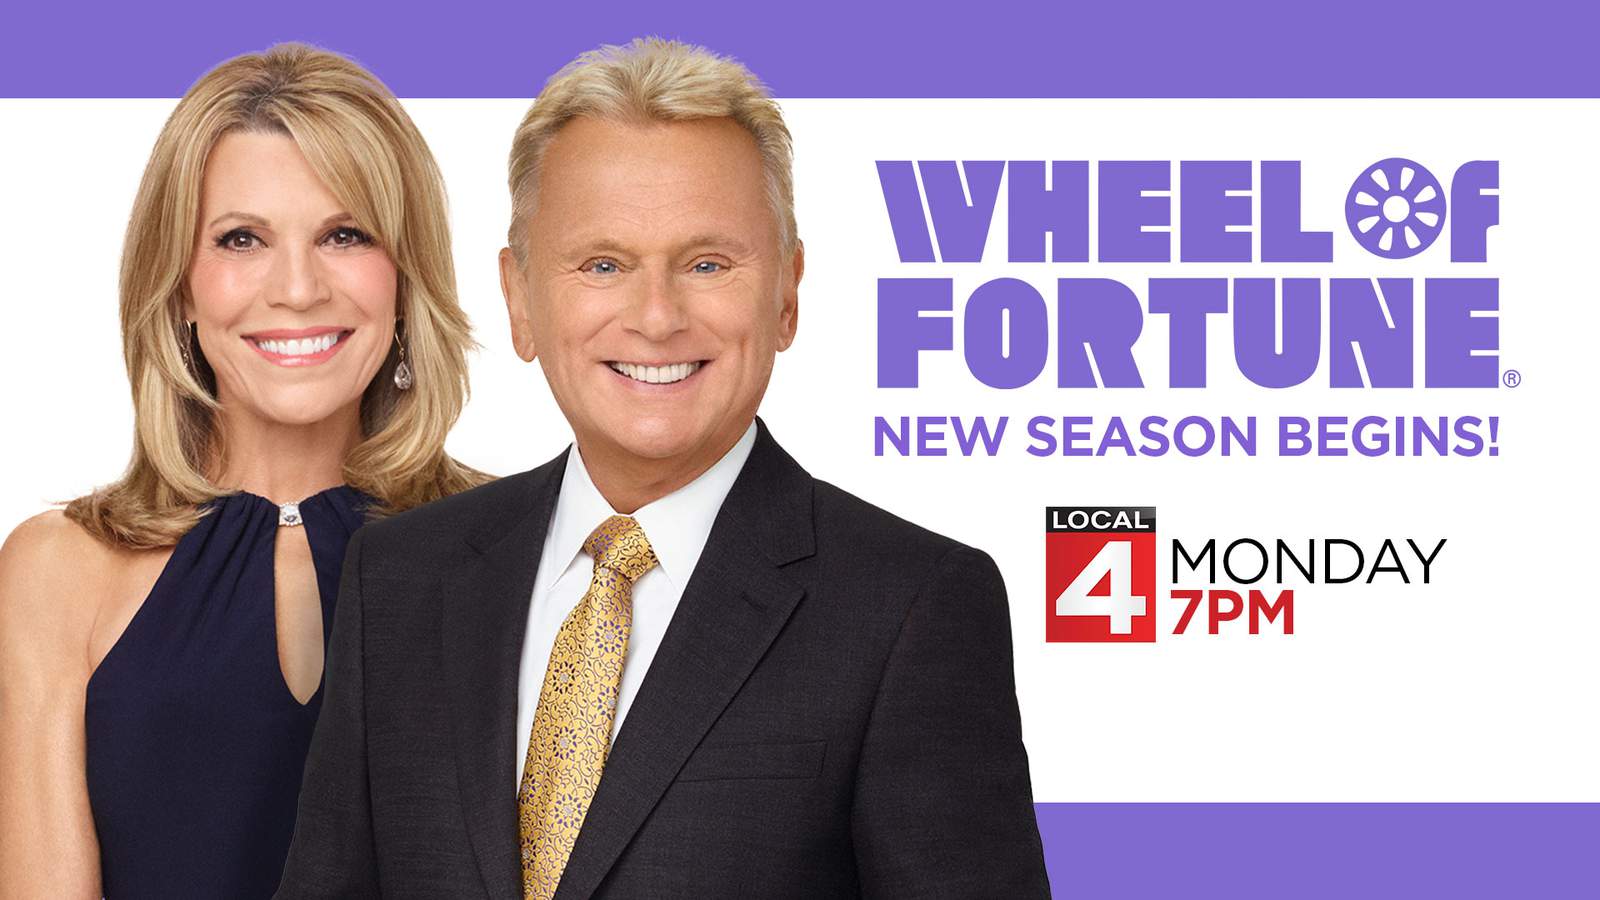 Monday season premieres of Wheel of Fortune, Jeopardy!, and Inside Edition